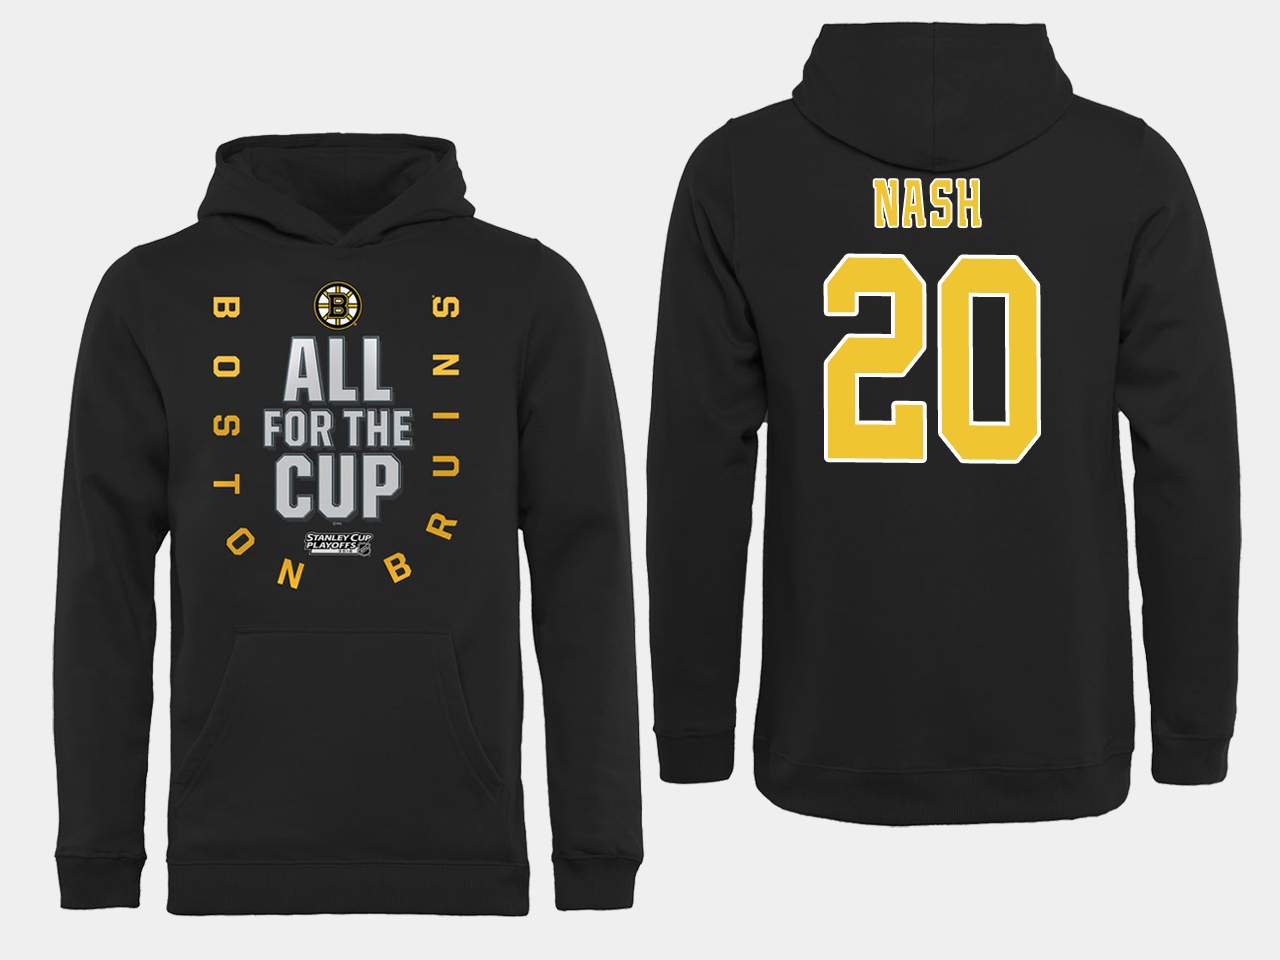 NHL Men Boston Bruins #20 Nash Black All for the Cup Hoodie->boston bruins->NHL Jersey